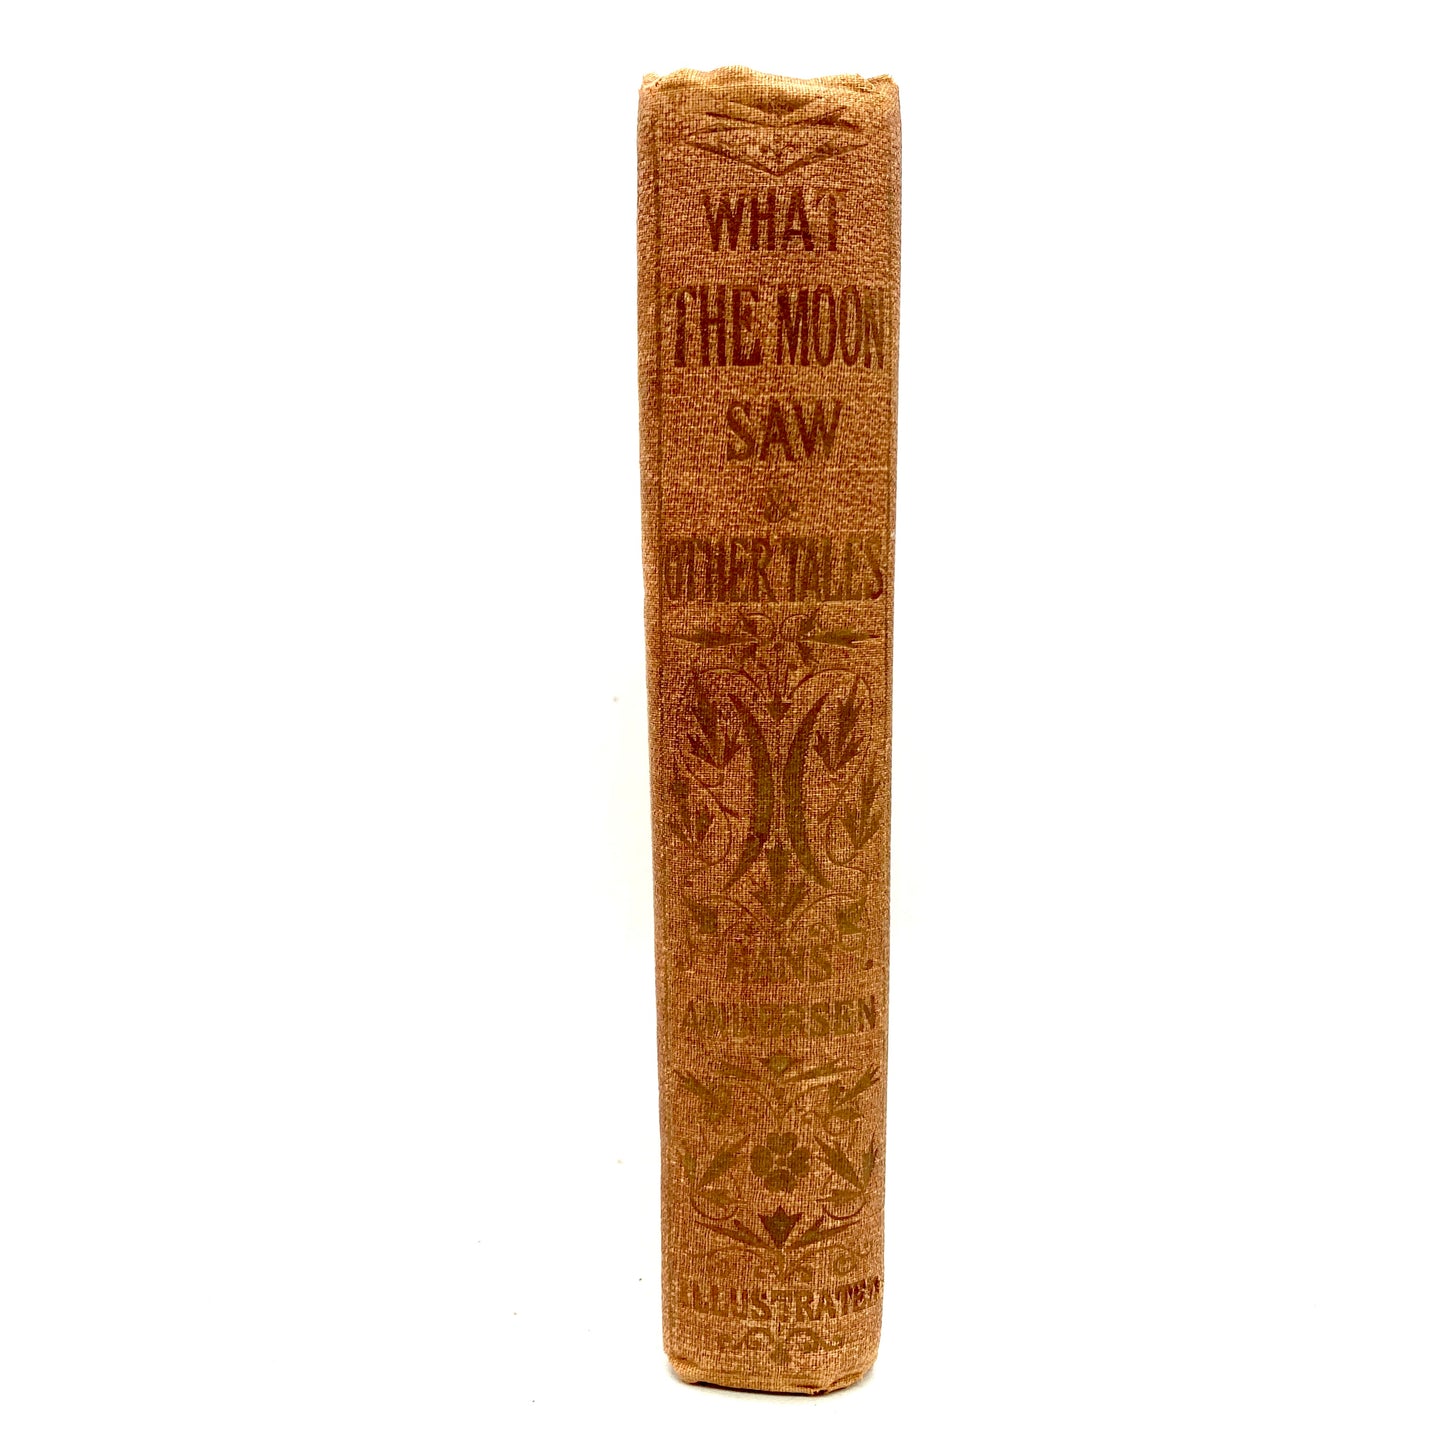 ANDERSEN, Hans Christian "What the Moon Saw" [George Routledge, 1866] 1st Edition - Buzz Bookstore